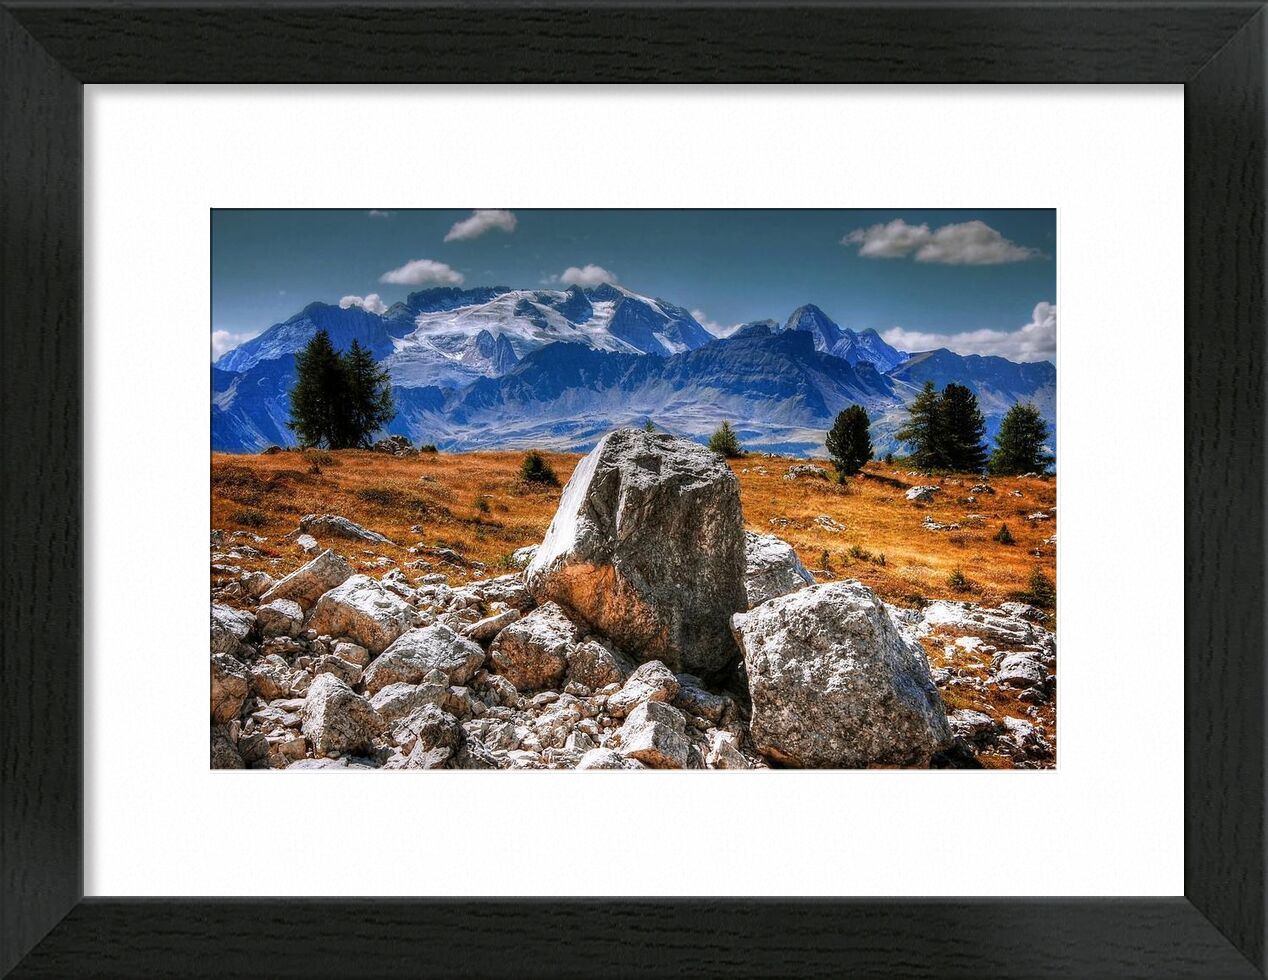 Adventure from Aliss ART, Prodi Art, mountain peak, hdr, boulders, view, valley, trees, travel, sky, scenic, rocks, outdoors, nature, mountains, landscape, hike, grass, daylight, clouds, adventure